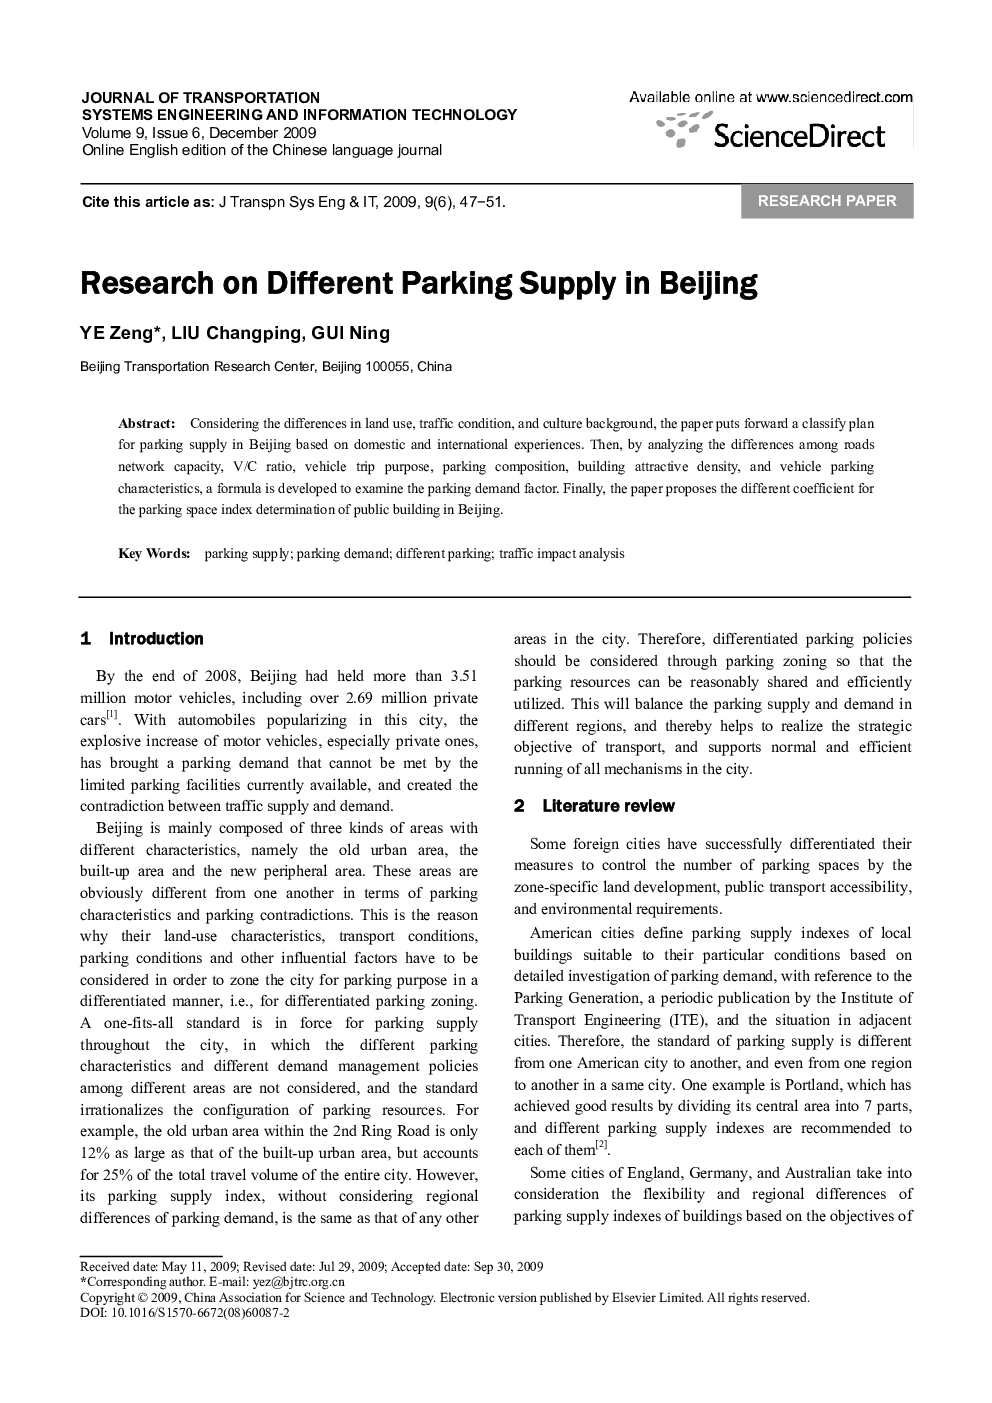 Research on Different Parking Supply in Beijing